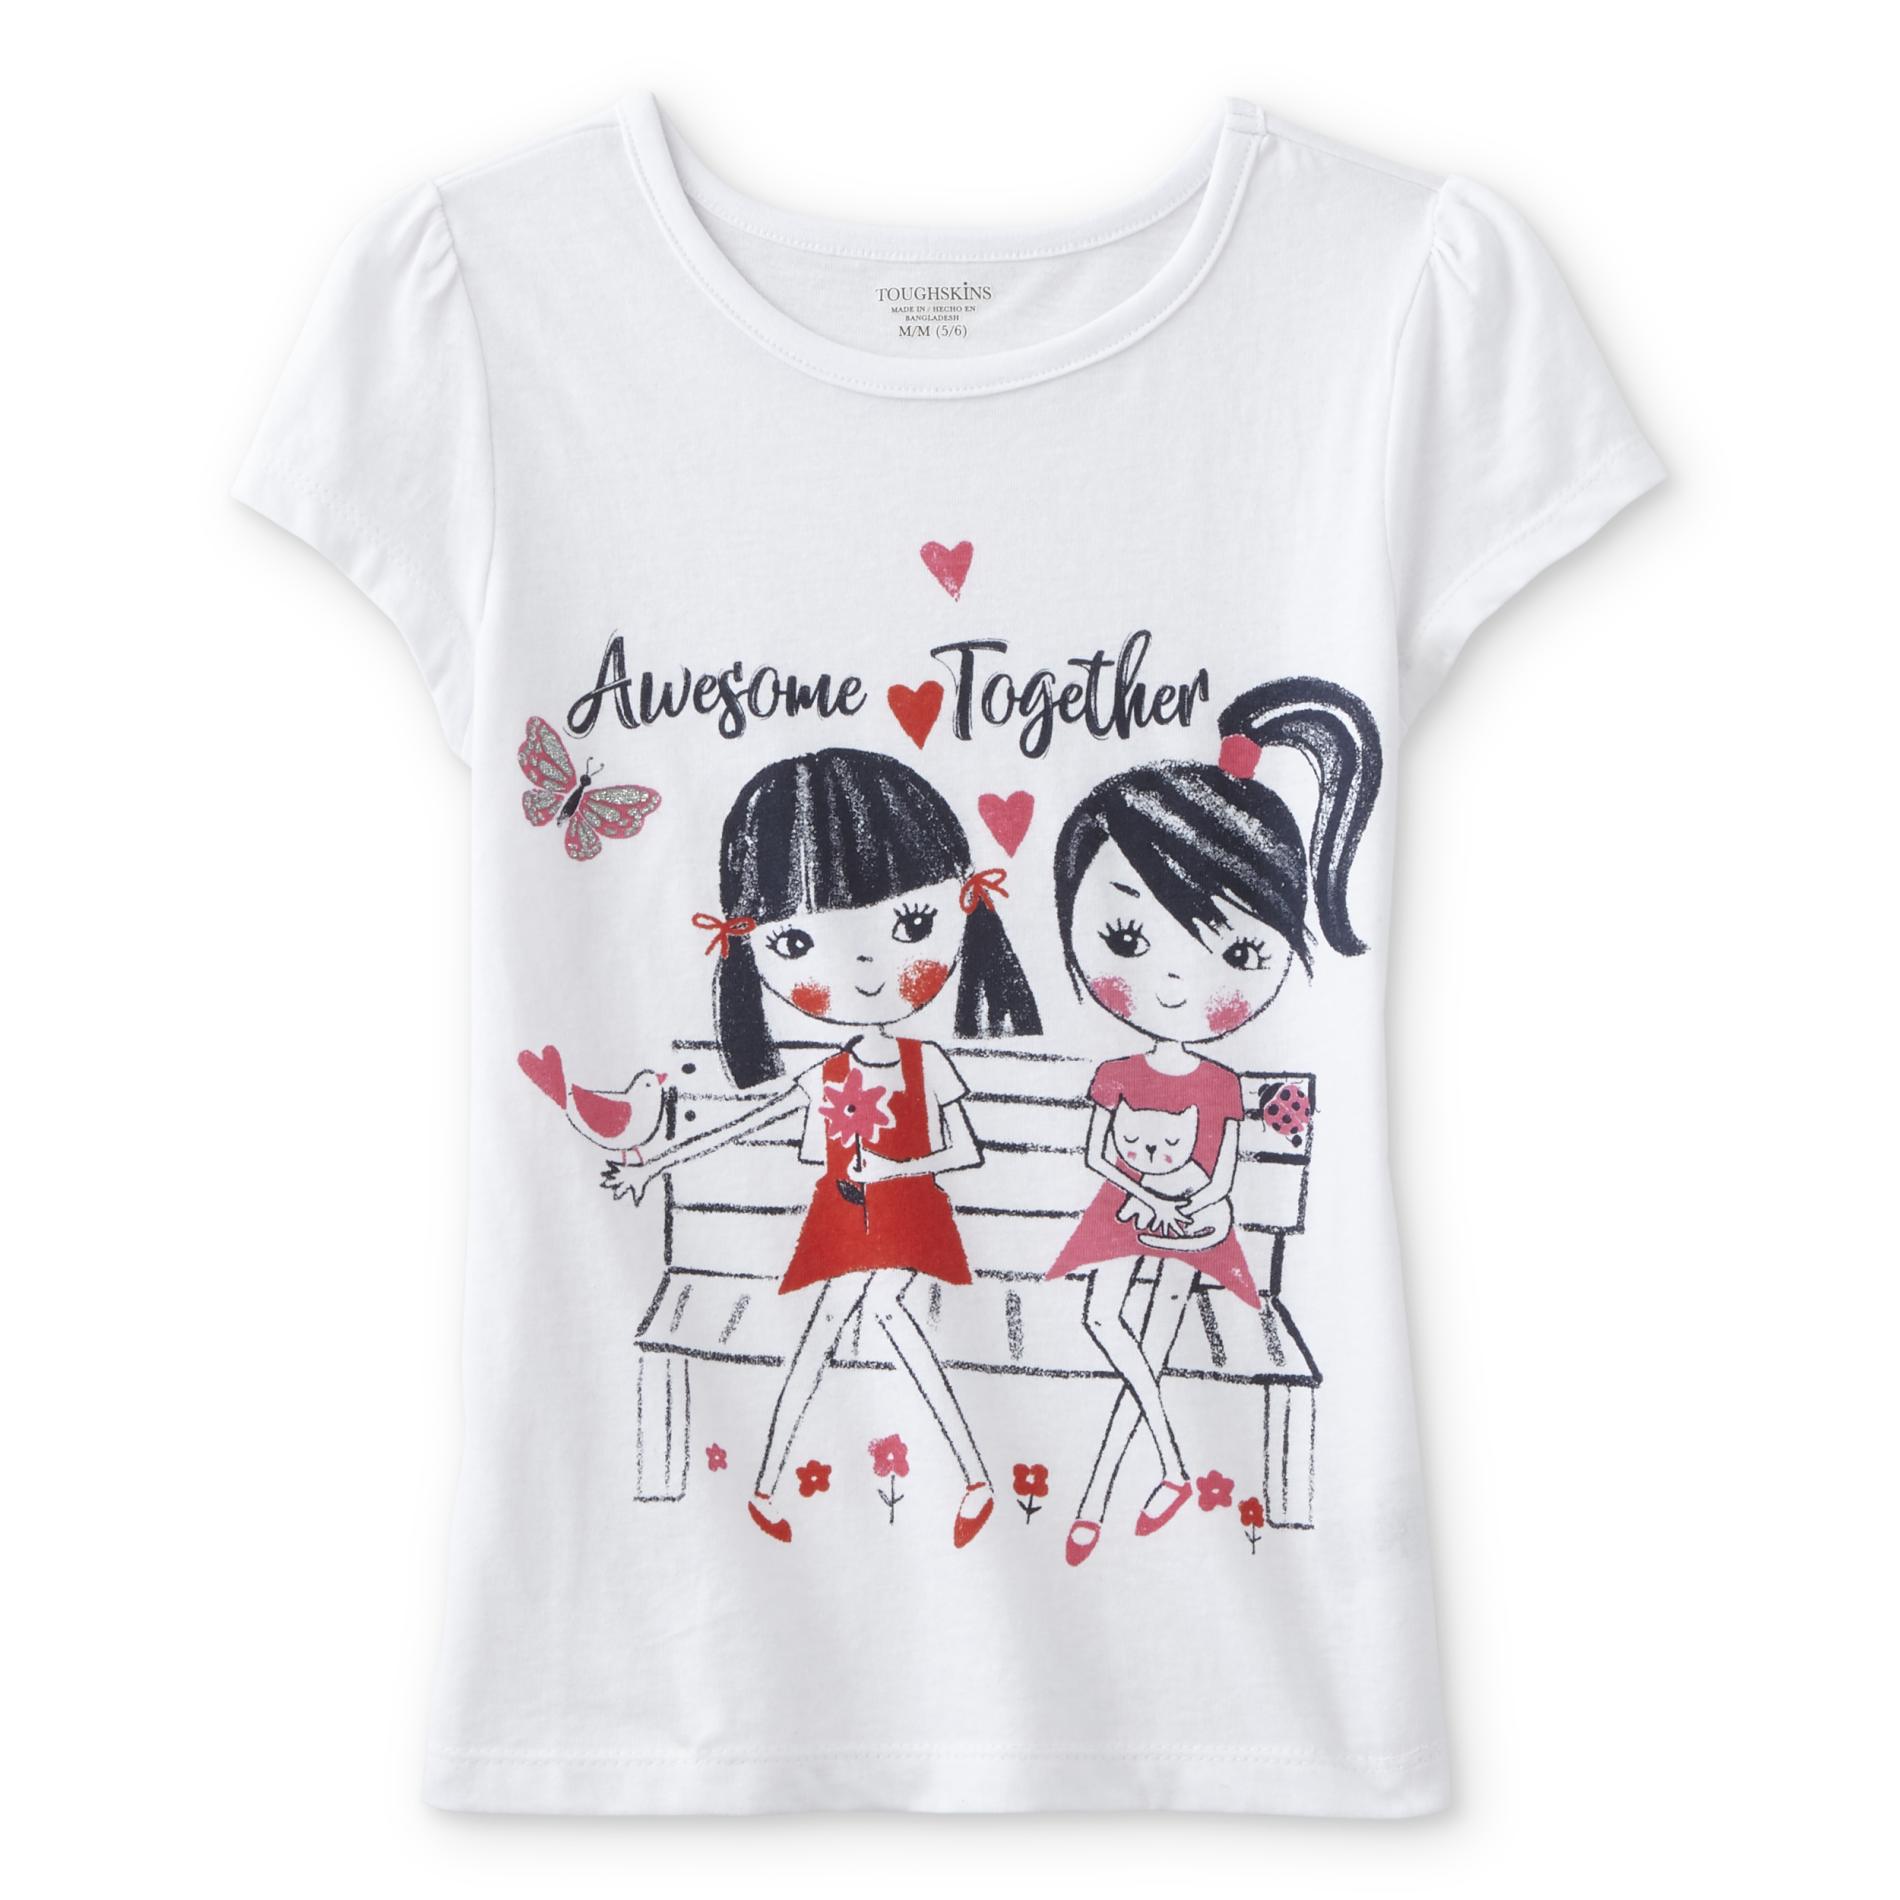 Toughskins Infant & Toddler Girls' Graphic T-Shirt - Awesome Together